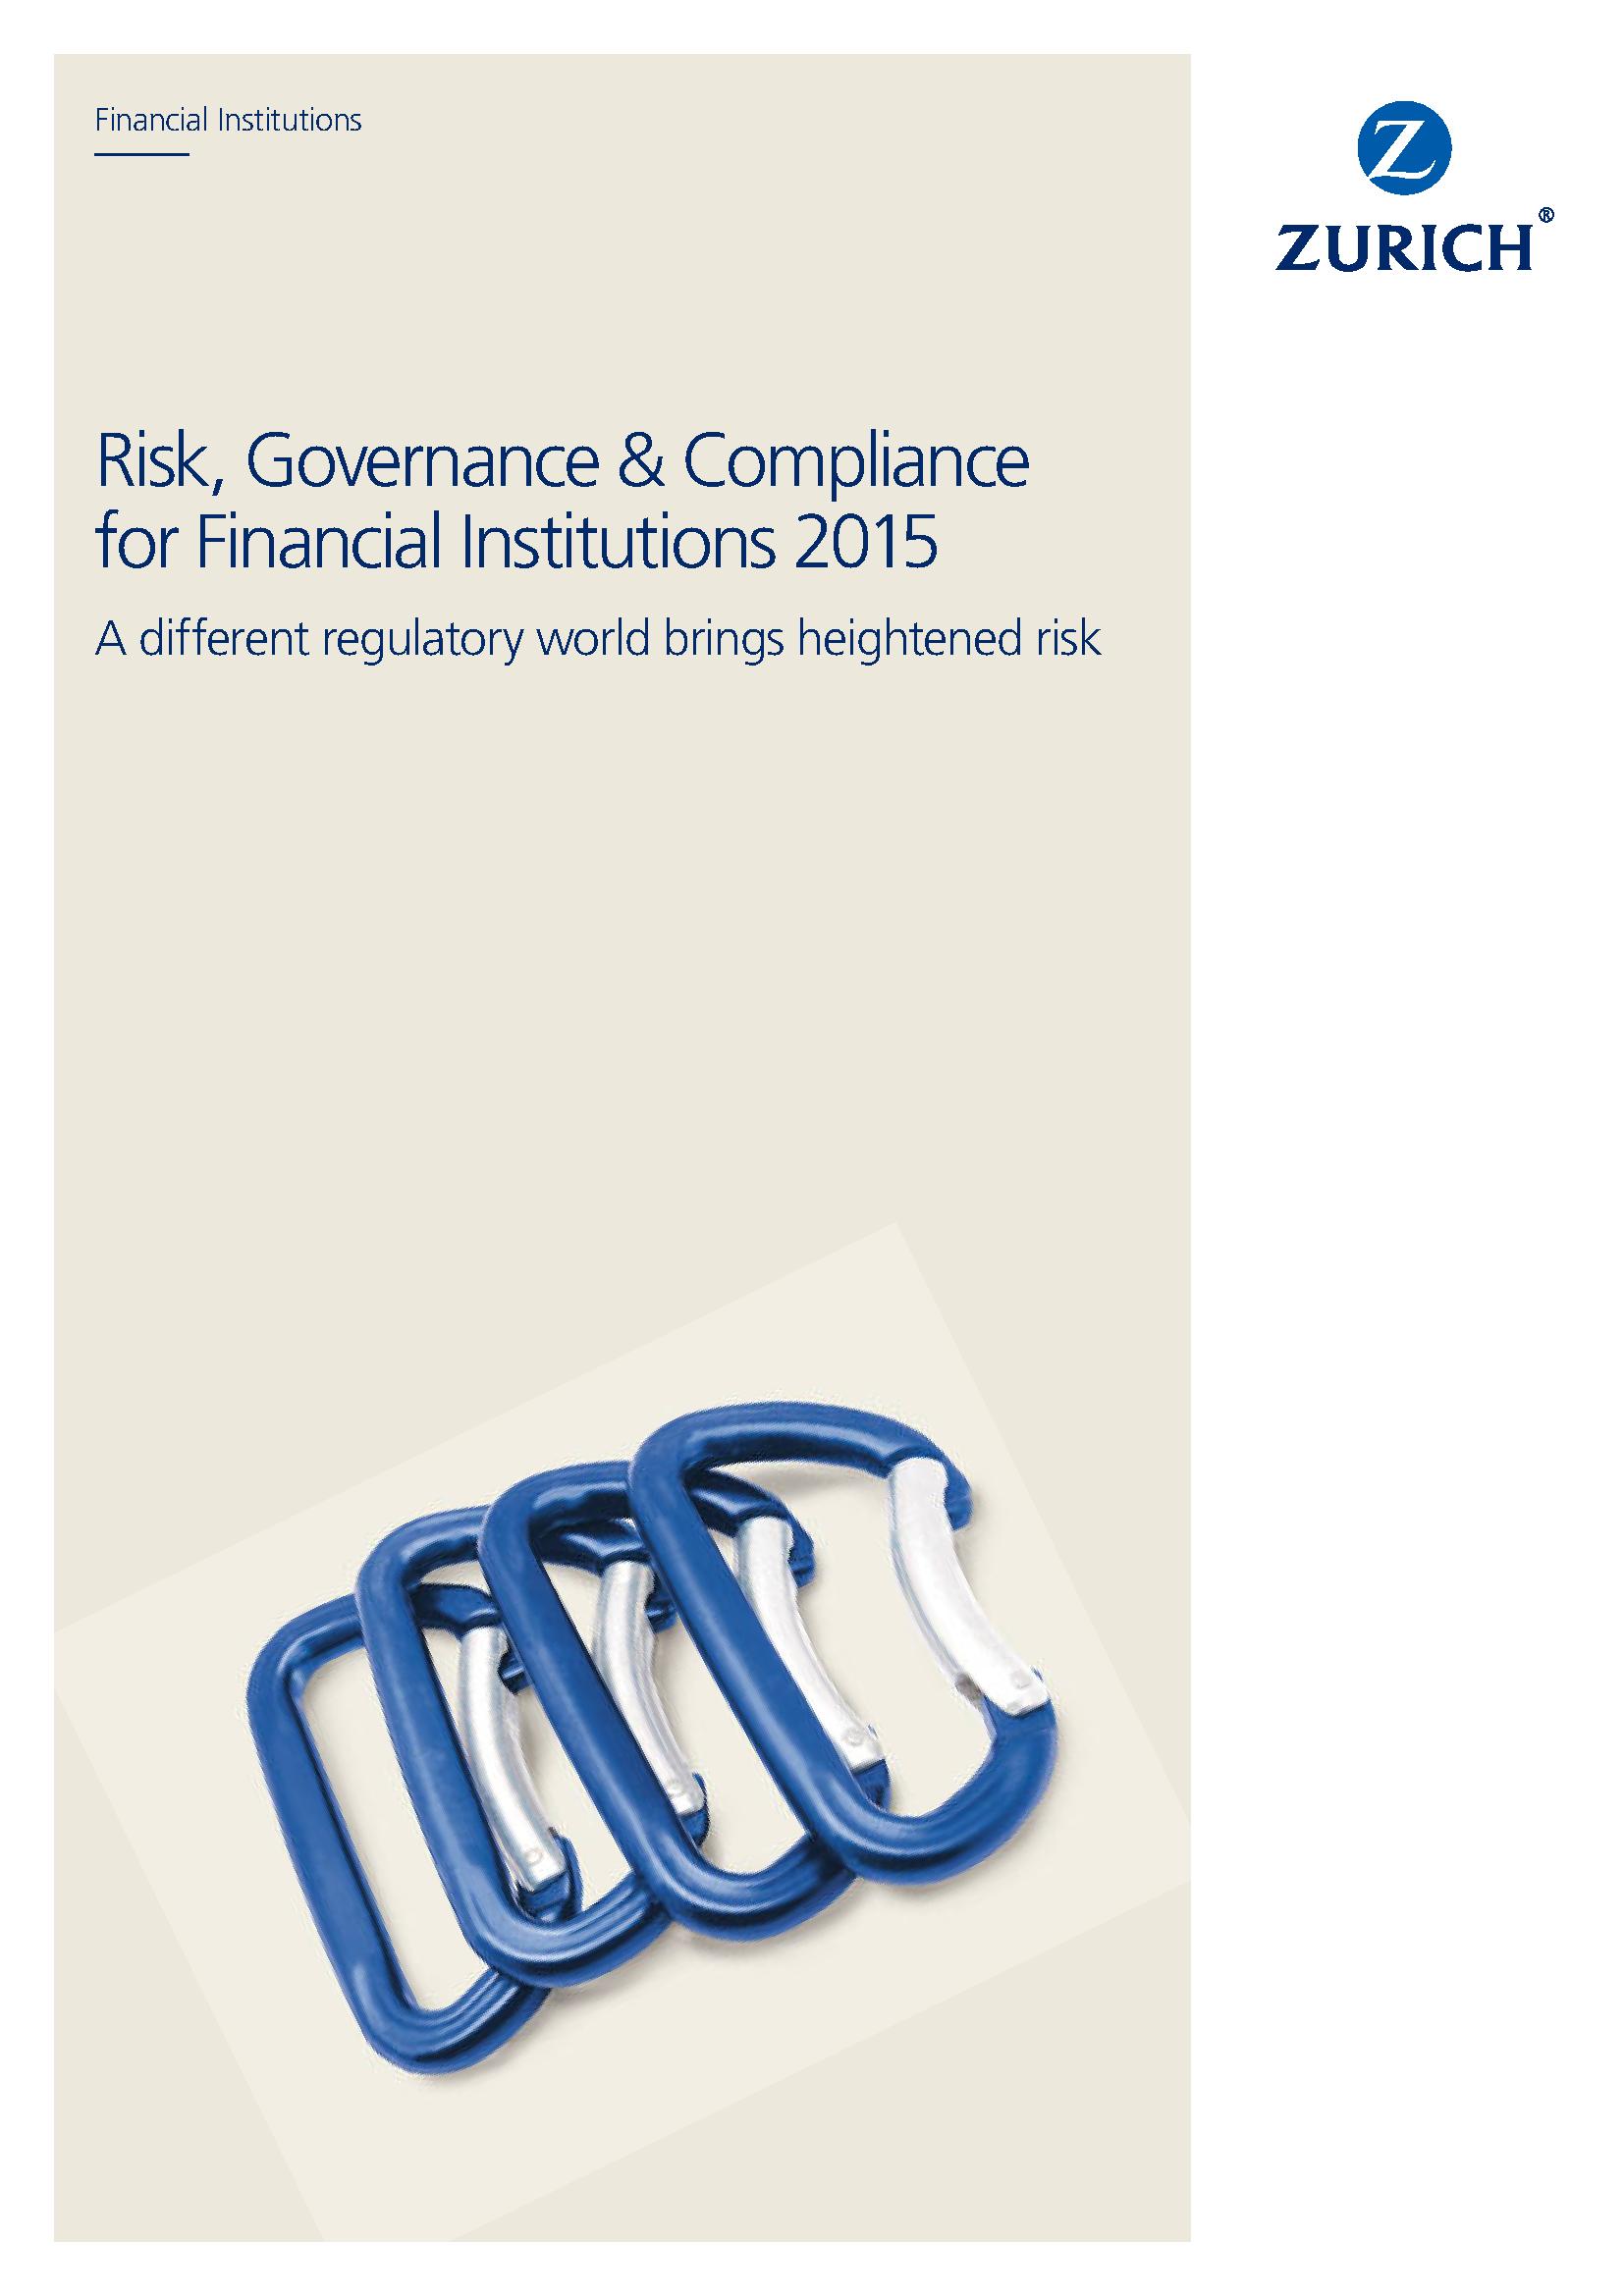 Risk, Governance, & Compliance for Financial Institutions 2015